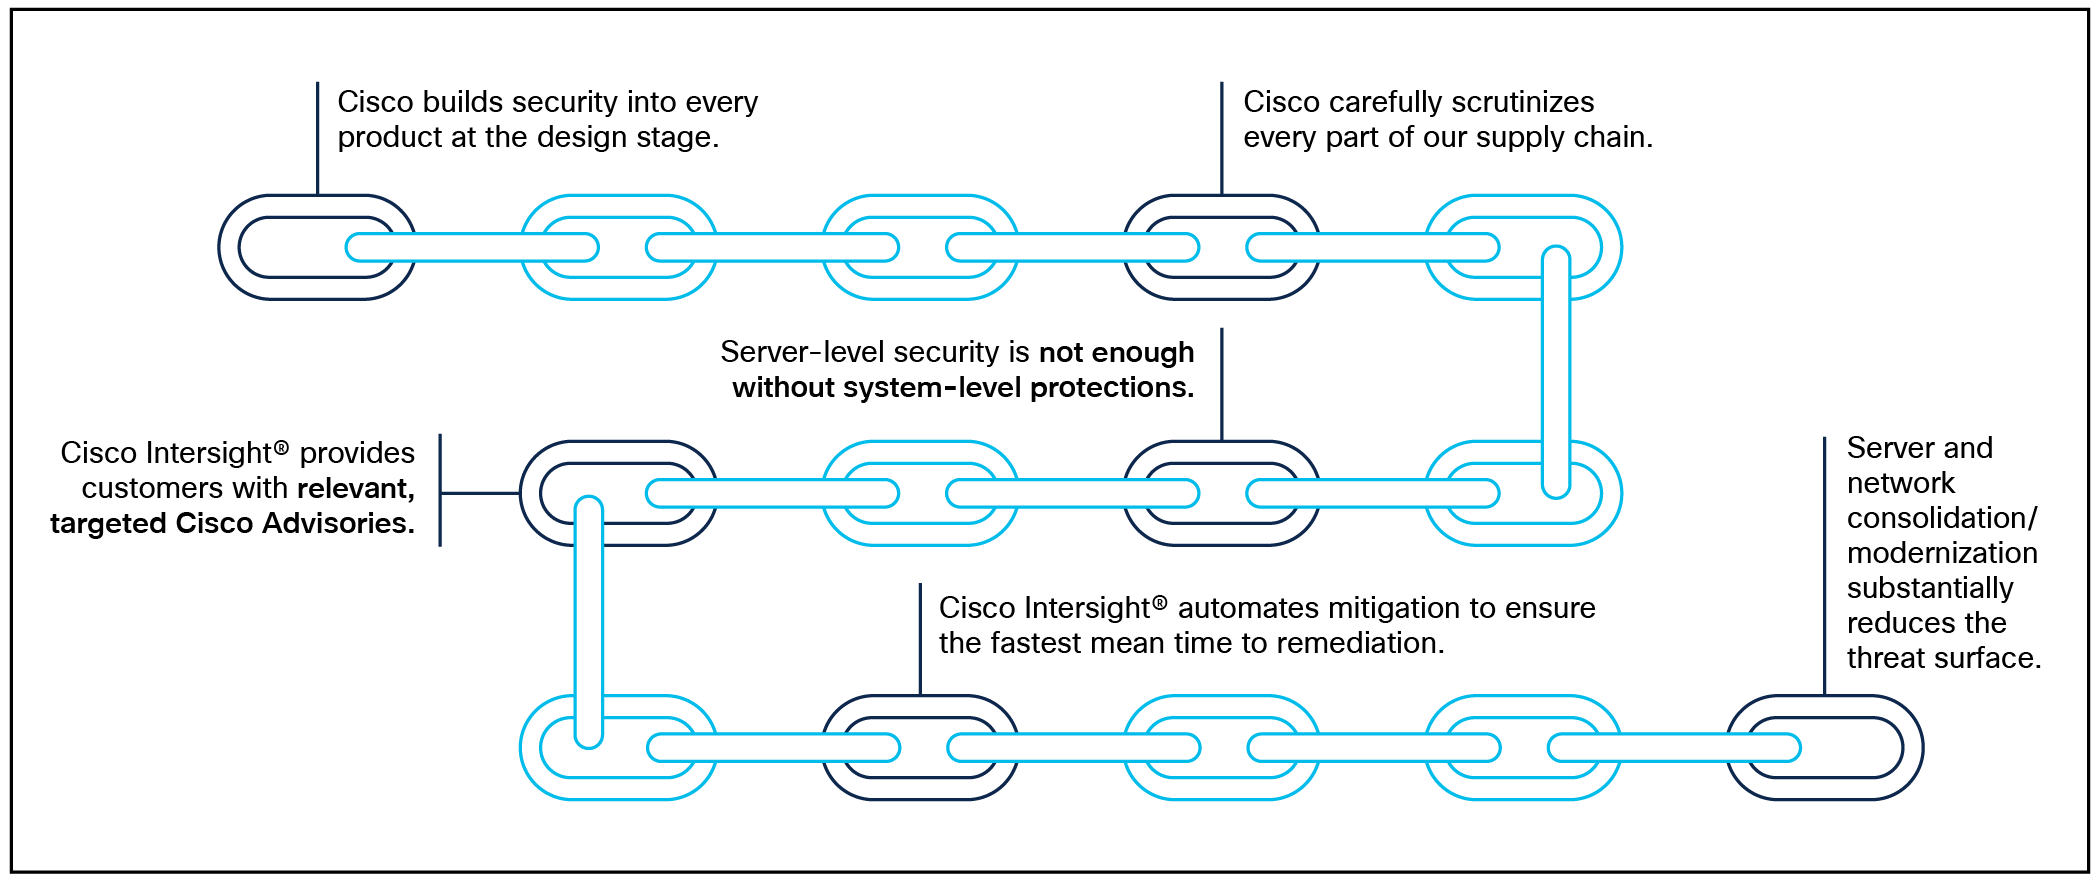 The Cisco security value chain